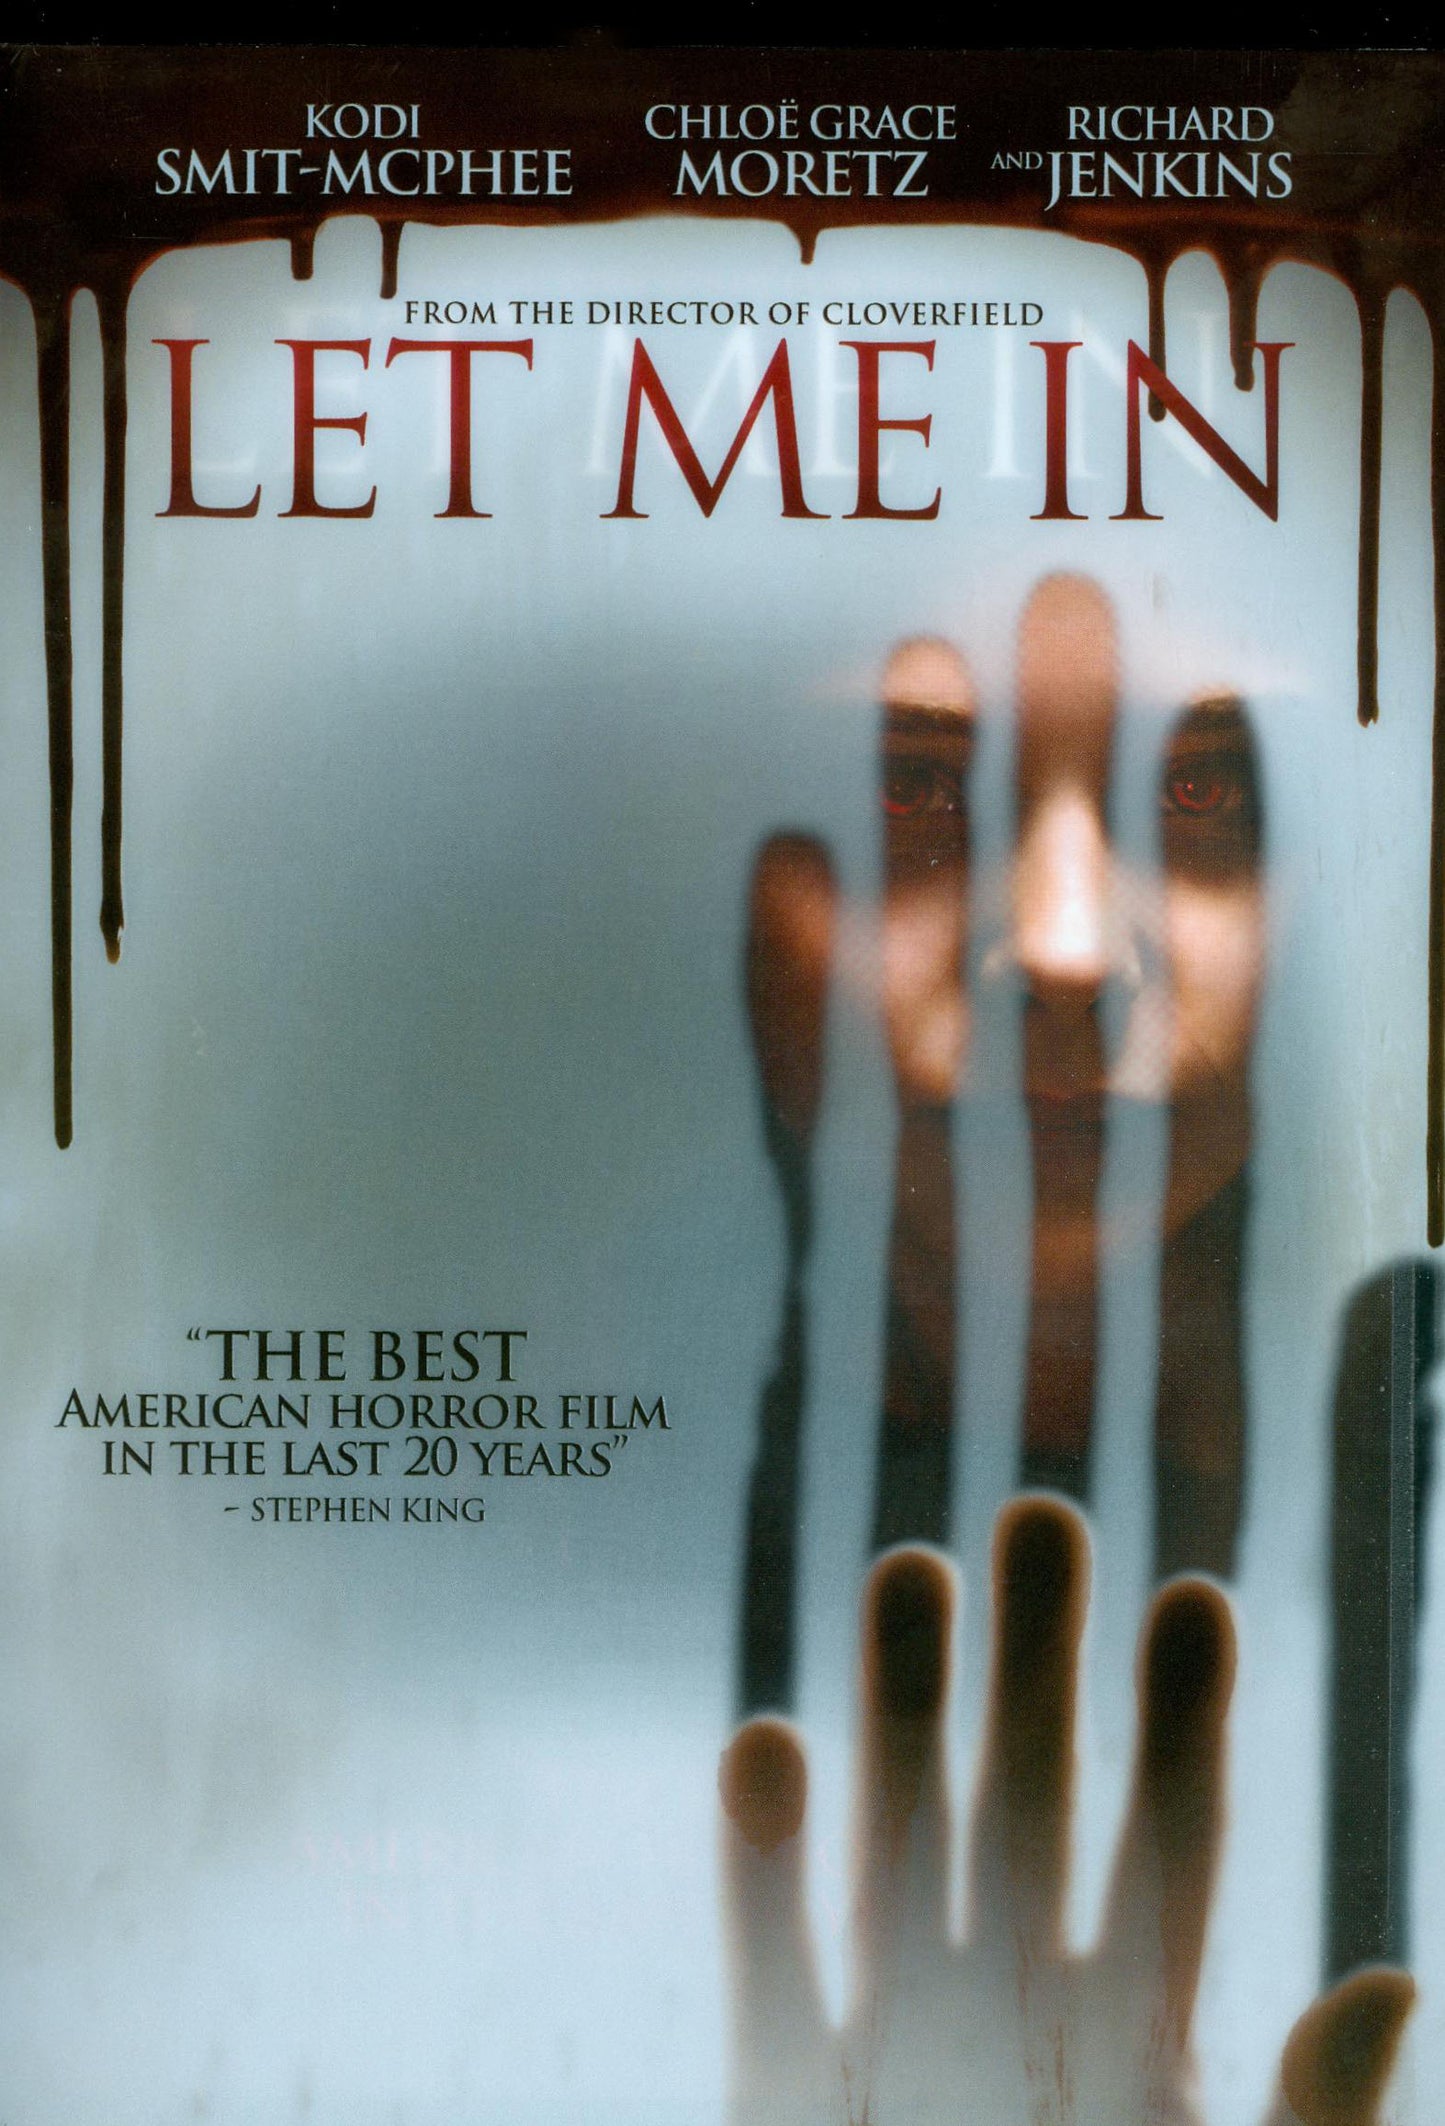 Let Me In cover art